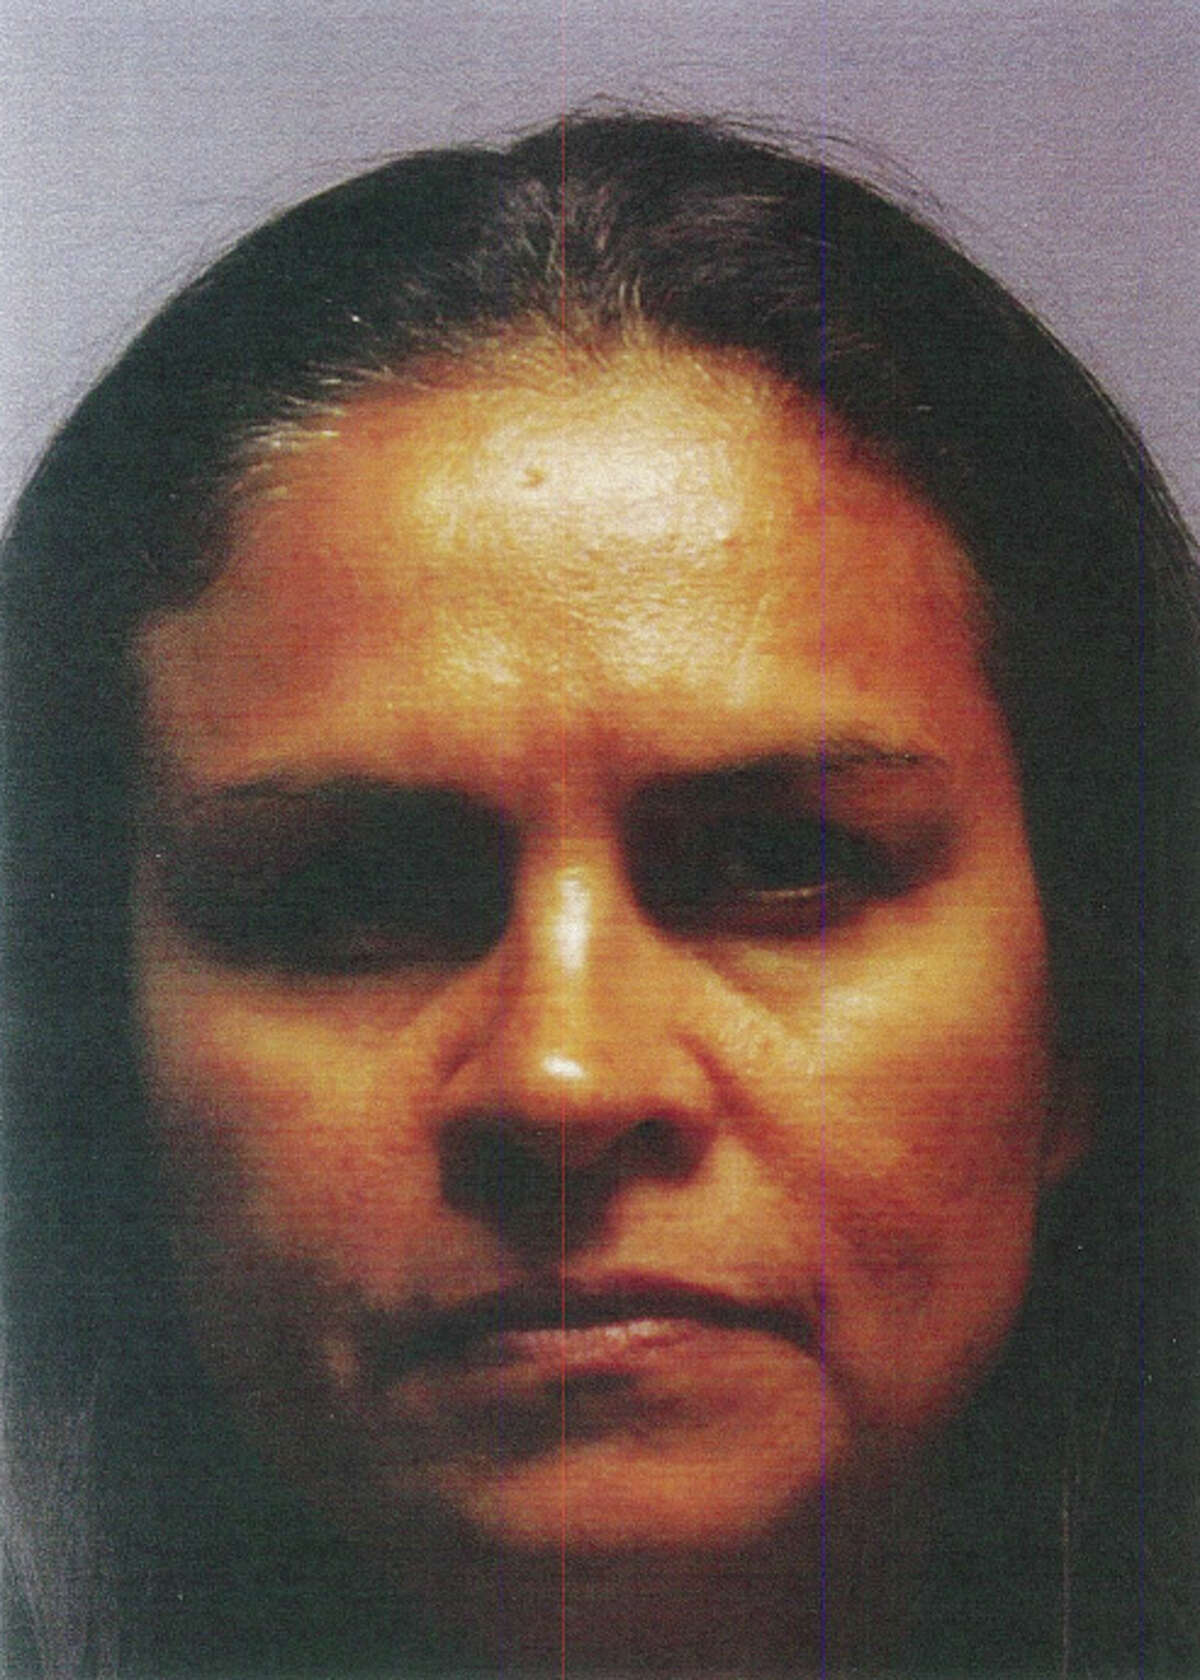 This undated photo provided by the Balch Springs, Texas, Police Department shows Araceli Meza. Meza, who operated a church at her suburban Dallas home, has been arrested for allegedly helping starve a 2-year-old boy to rid him of a “demon,” then holding a resurrection ceremony shortly after he died to try to revive him, investigators said Tuesday, April 14, 2015. Meza was charged Monday with injury to a child causing serious bodily injury by omission. (Balch Springs Police Department via AP)